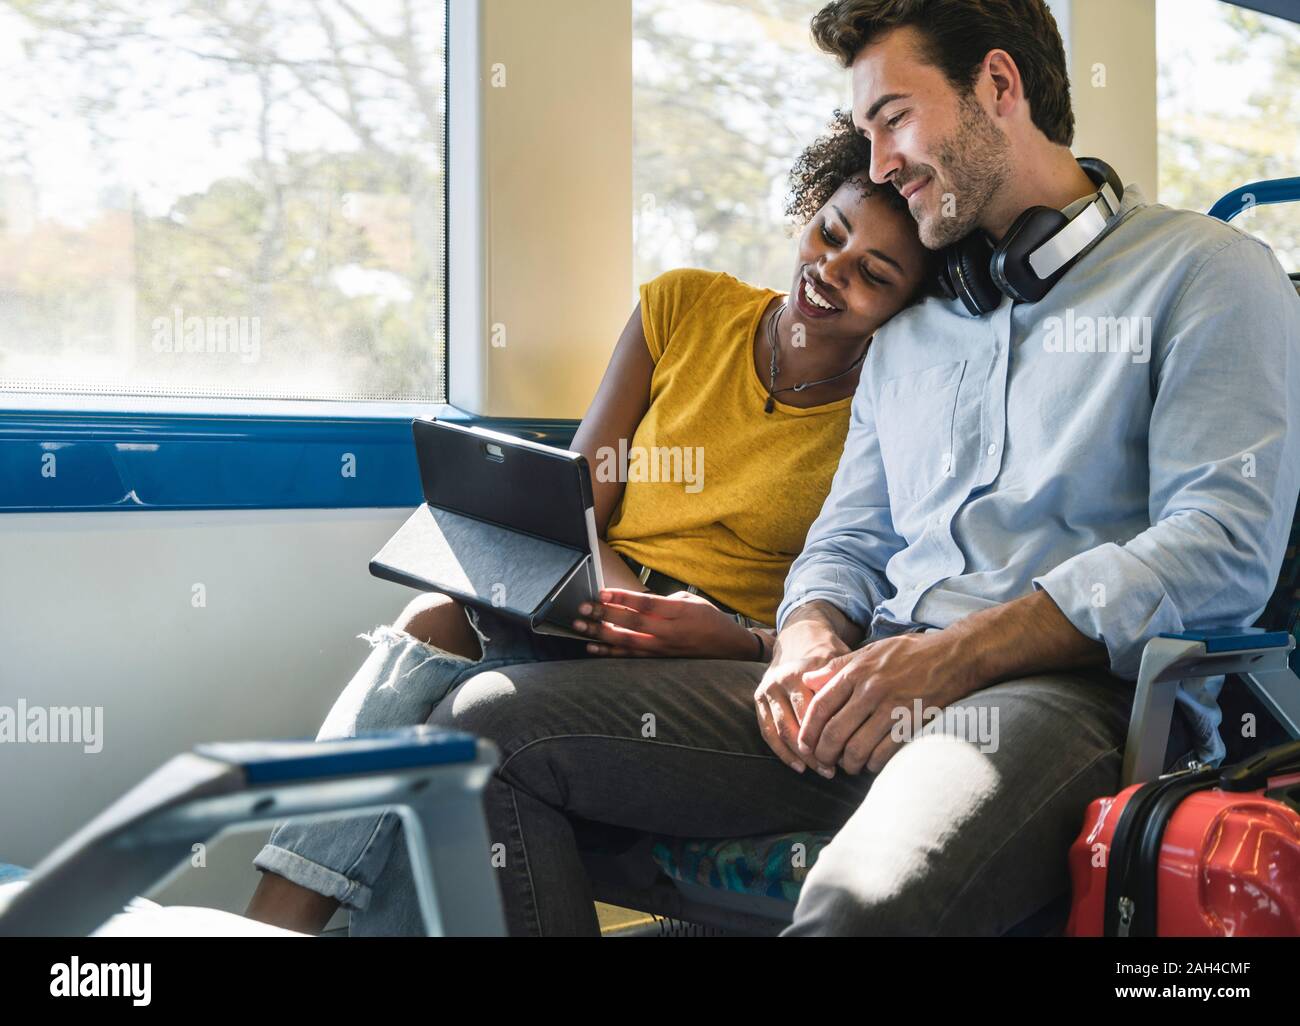 Young couple with tablet relaxing in a train Stock Photo